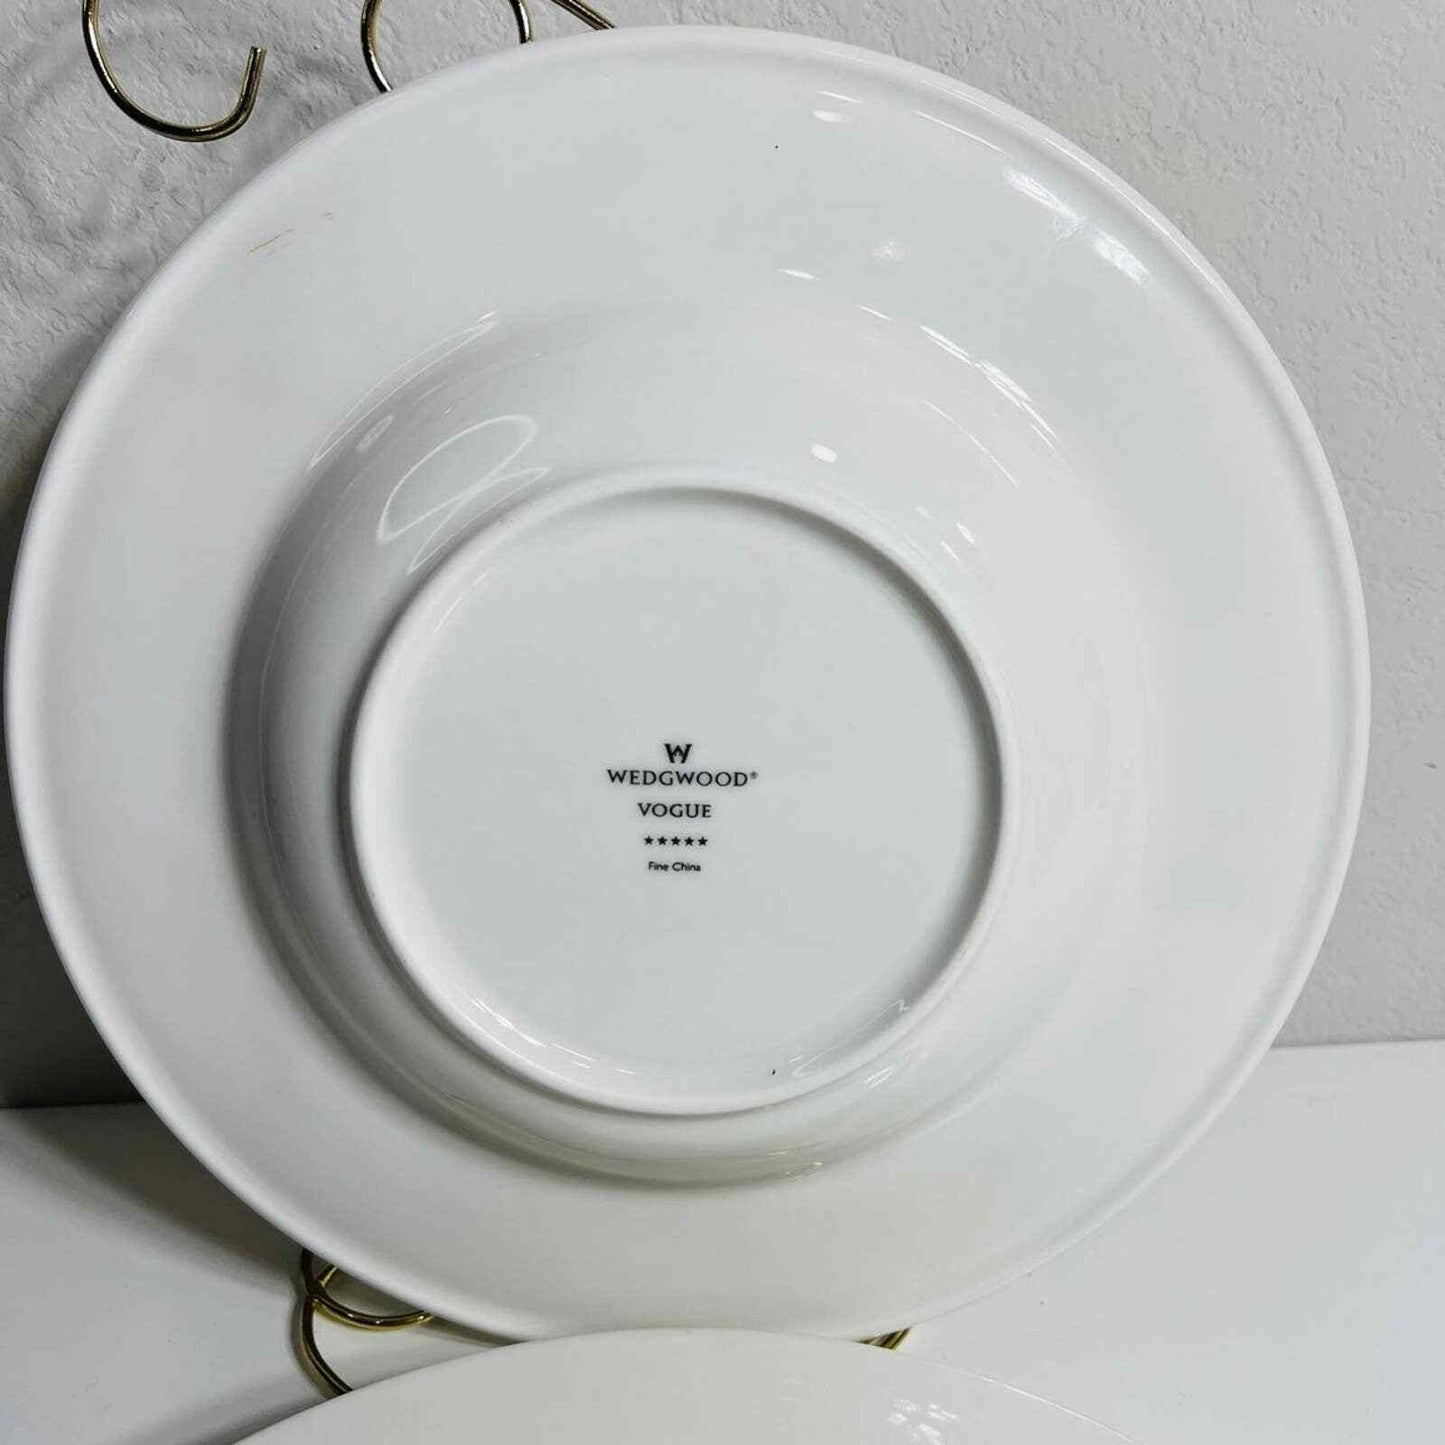 Wedgwood Vogue Fine china serving plates bowls hotel dining white dishes England